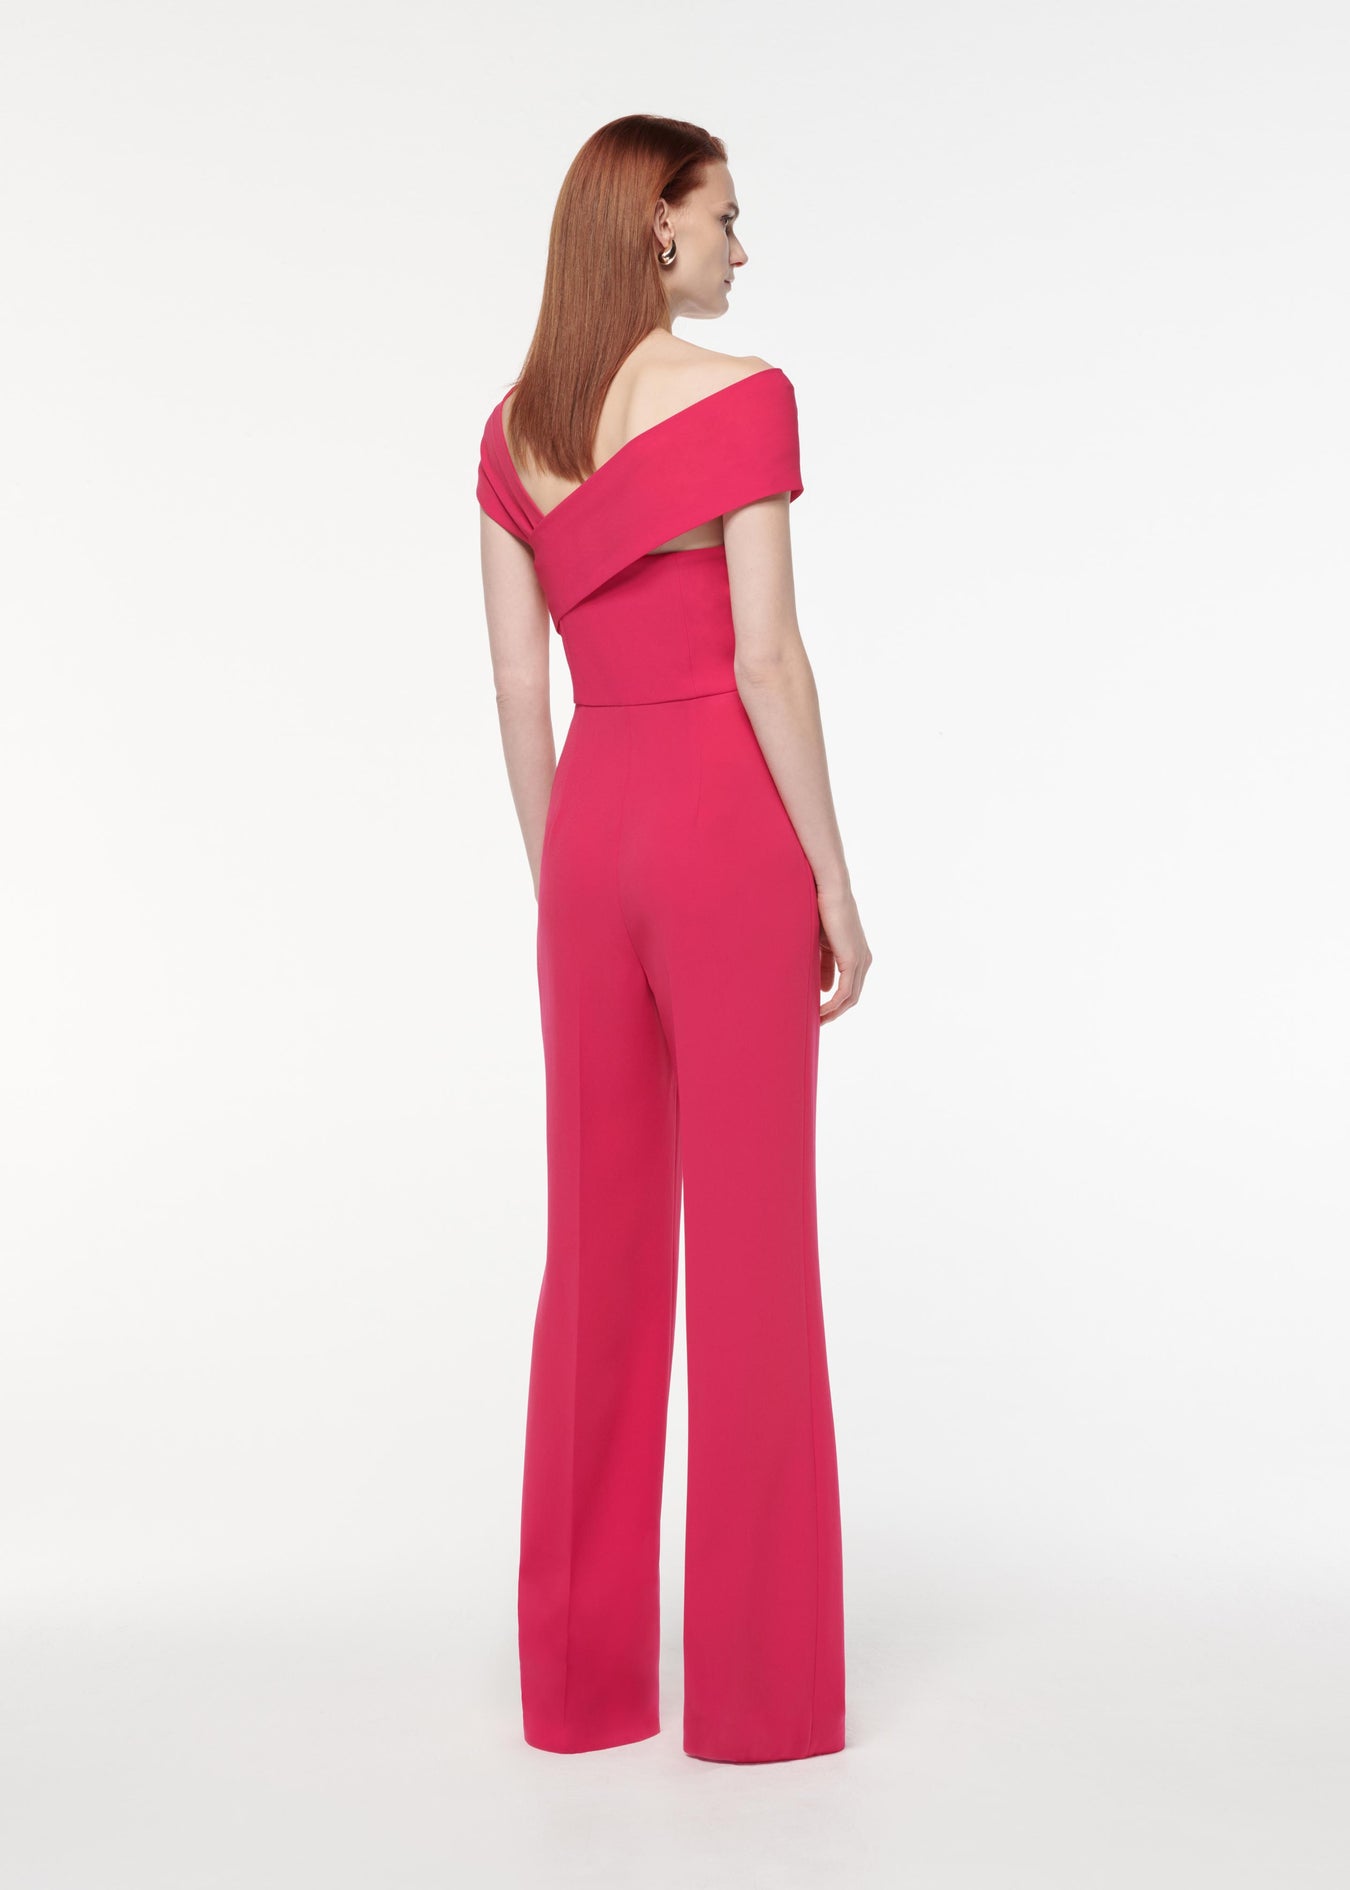 A photograph of a woman wearing aAsymmetric Light Cady Jumpsuit in Pink